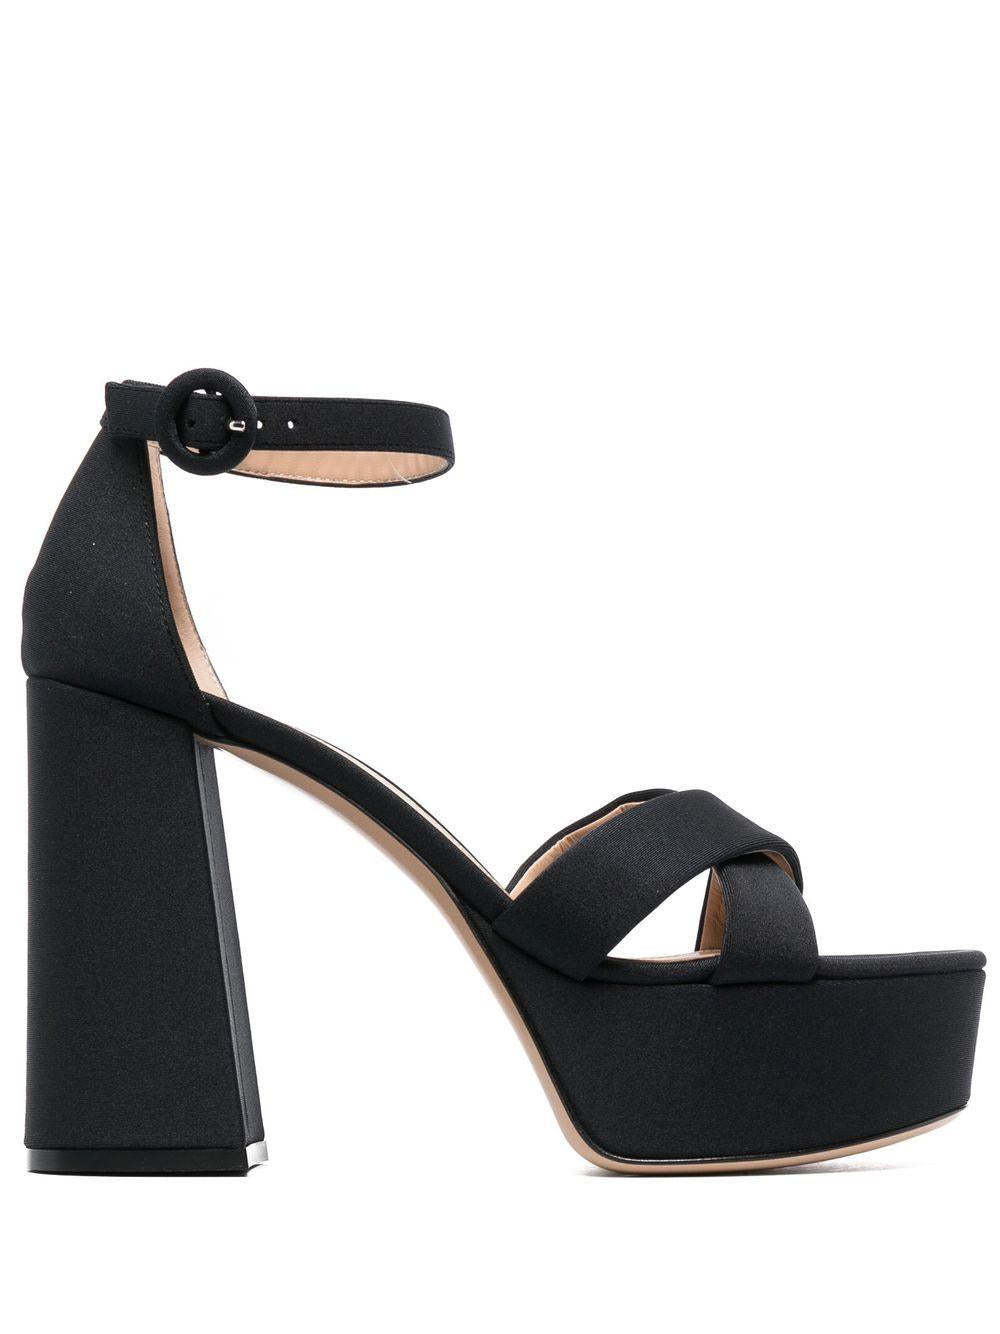 Gianvito Rossi Stylish Black Sandals With Platform Sole For Women